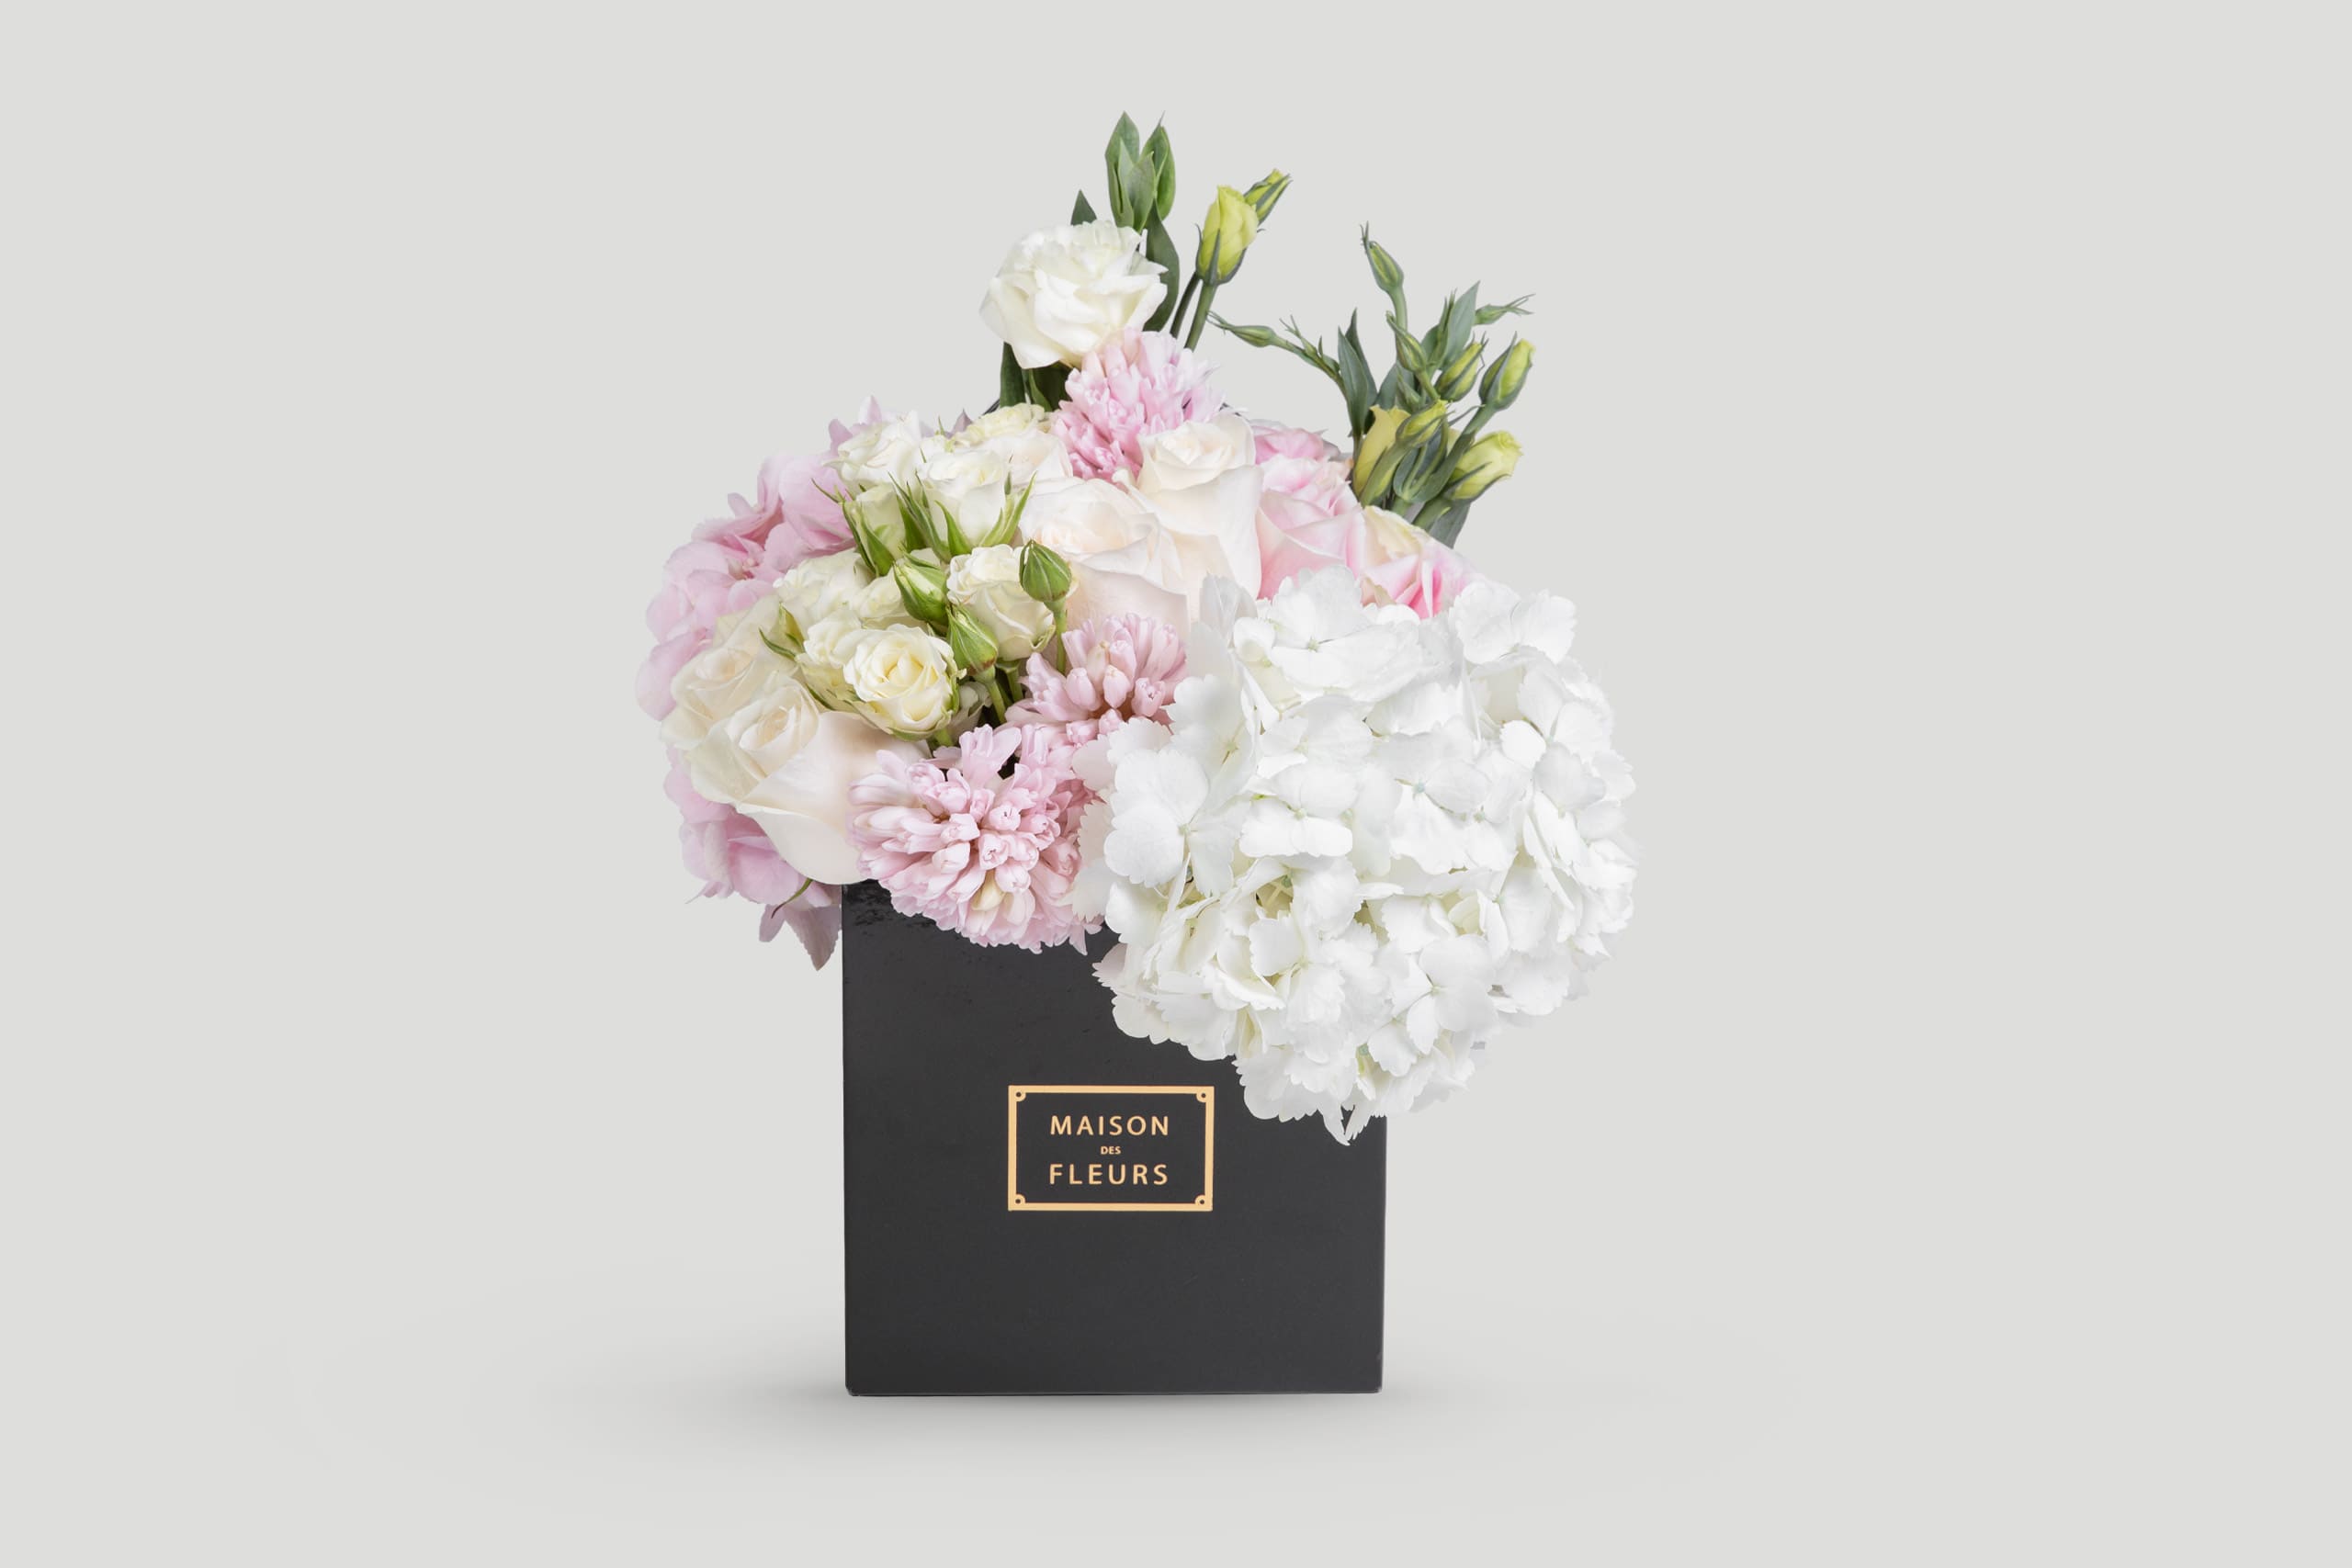 White Roses & Pink Hydrangea Flowers Arrangement in a White Square Box